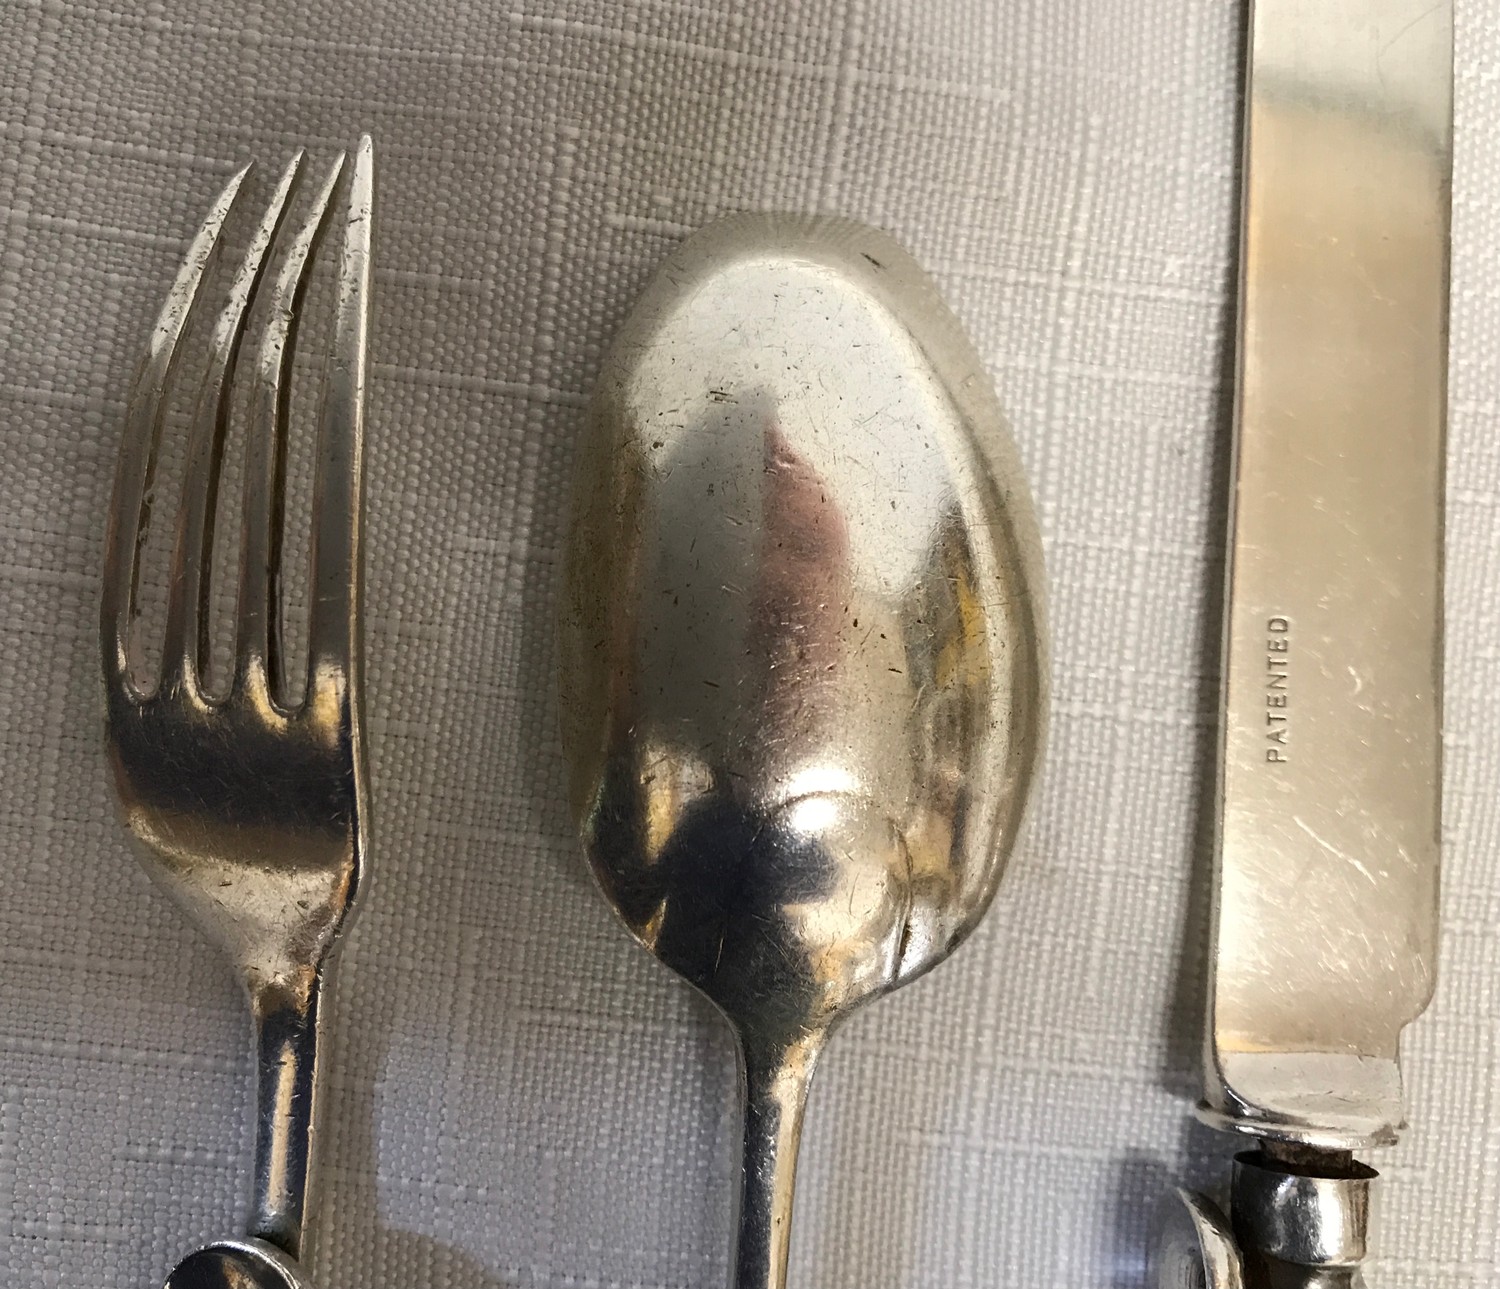 A Silver cutlery set, Sheffield 1910 L BRS Ltd with ergonomic design possibly for infants due to - Image 3 of 5